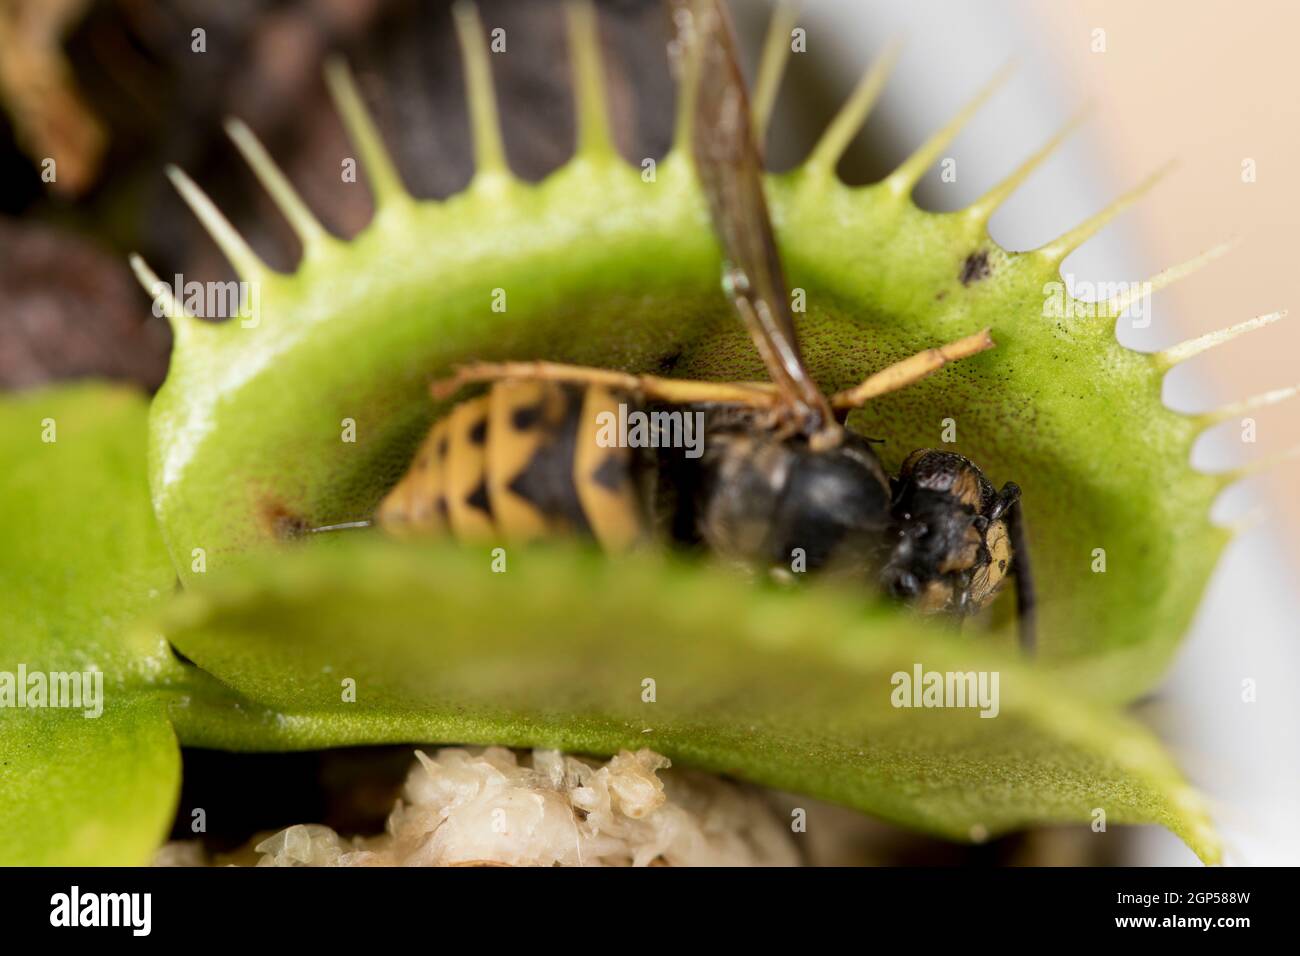 https://c8.alamy.com/comp/2GP588W/insect-eating-plants-close-up-venus-fly-trap-with-wasp-corpse-2GP588W.jpg